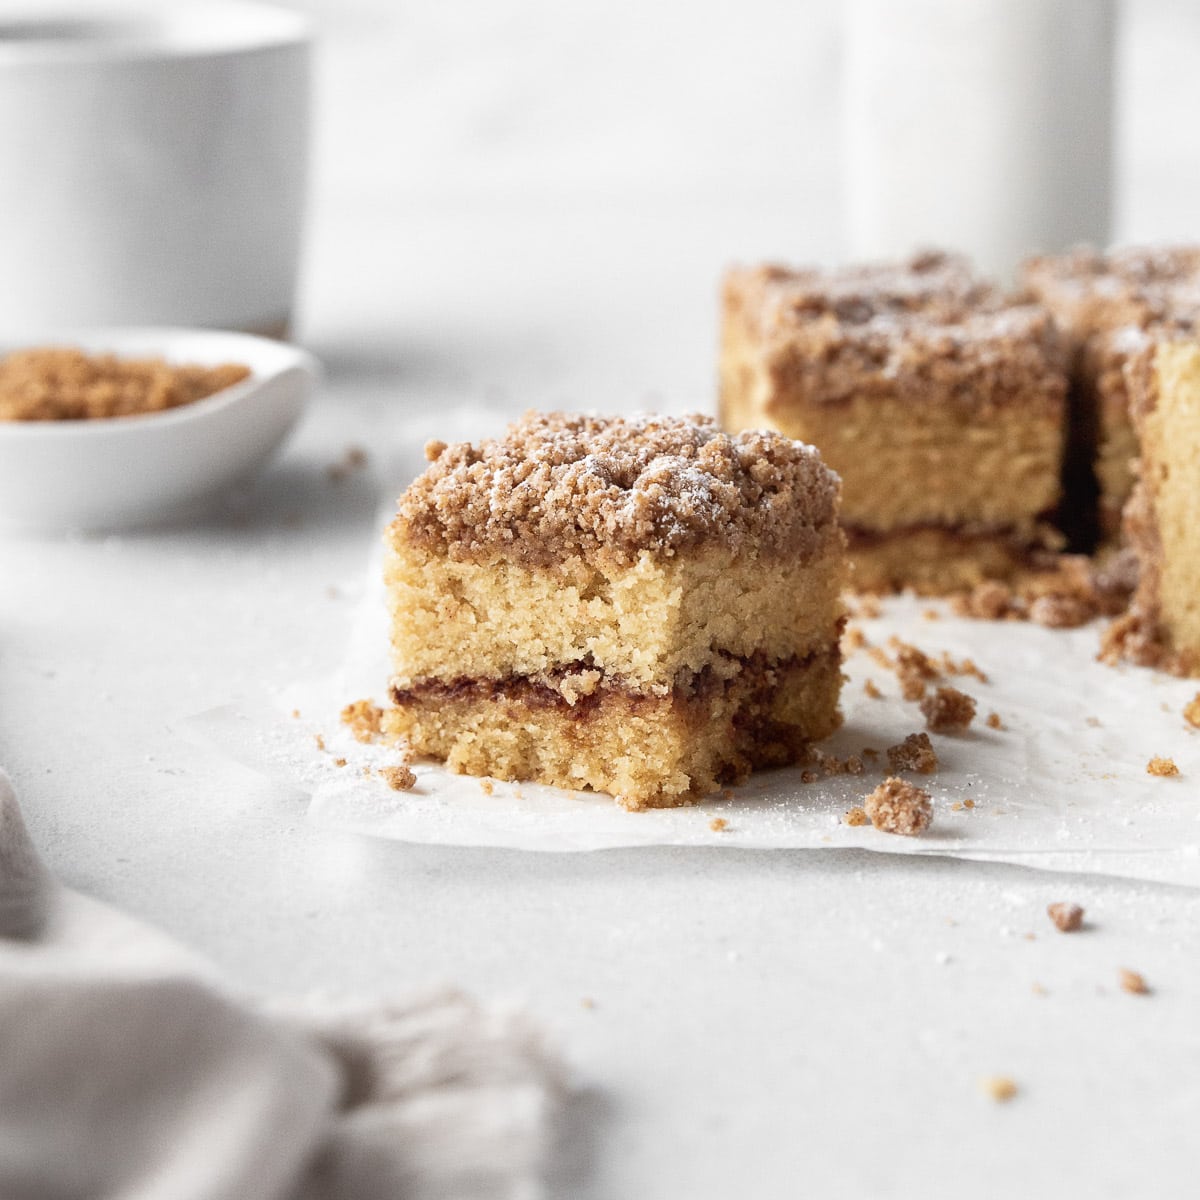 Square sideways hero shot of a square of fluffy, moist, gluten-free cinnamon coffee cake with a crumble topping.